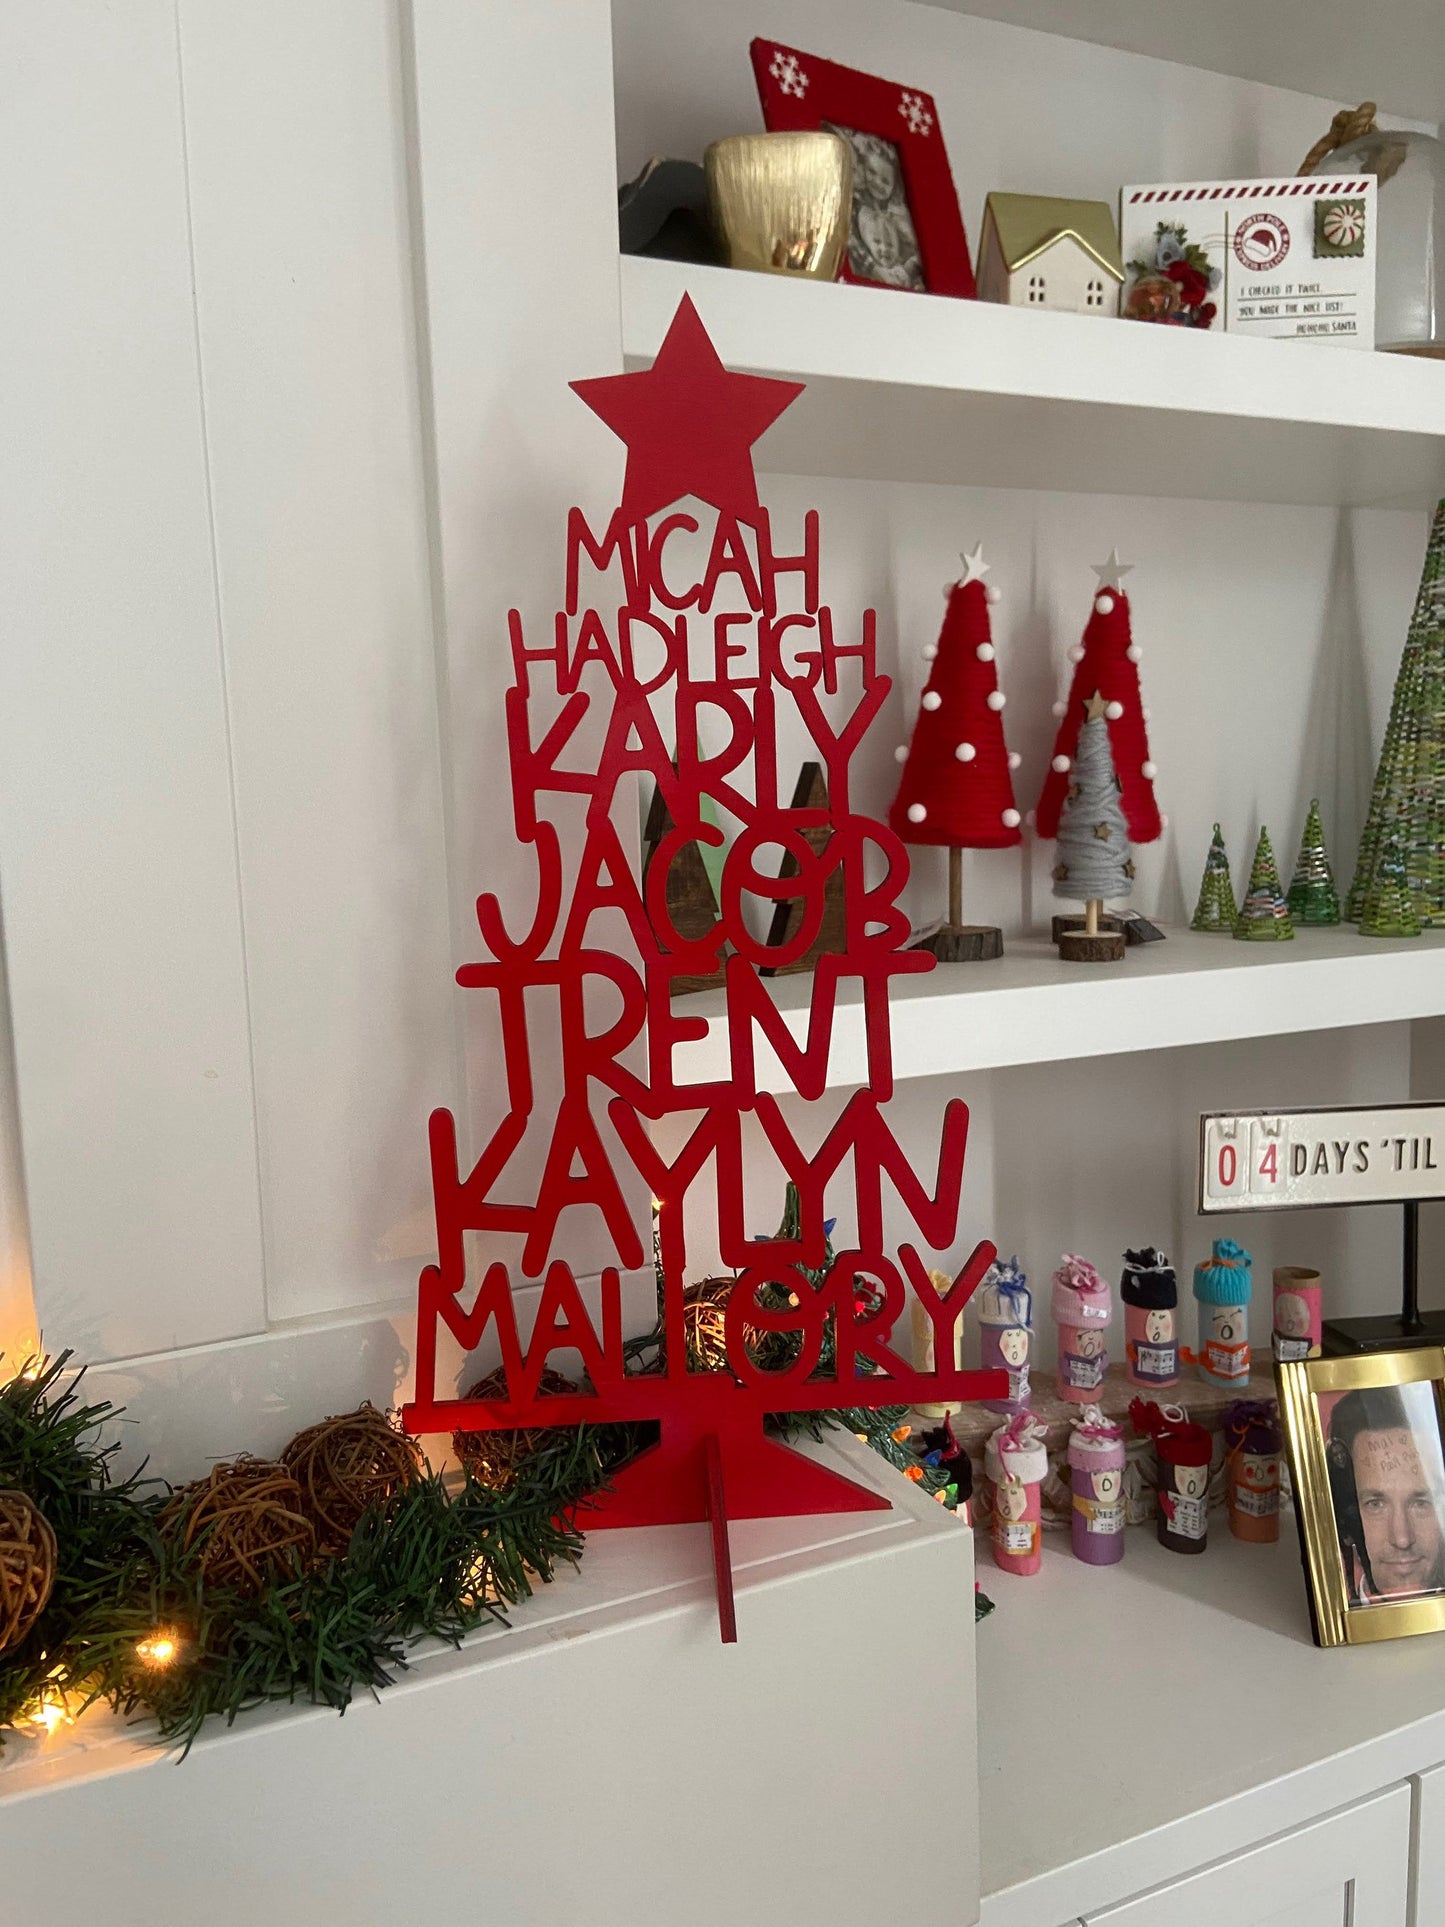 Grandkids Christmas Tree Personalized with Names, Family & Kids Names Tree, Gift for Grandma, Gift for Grandpa [FREE SHIPPING]